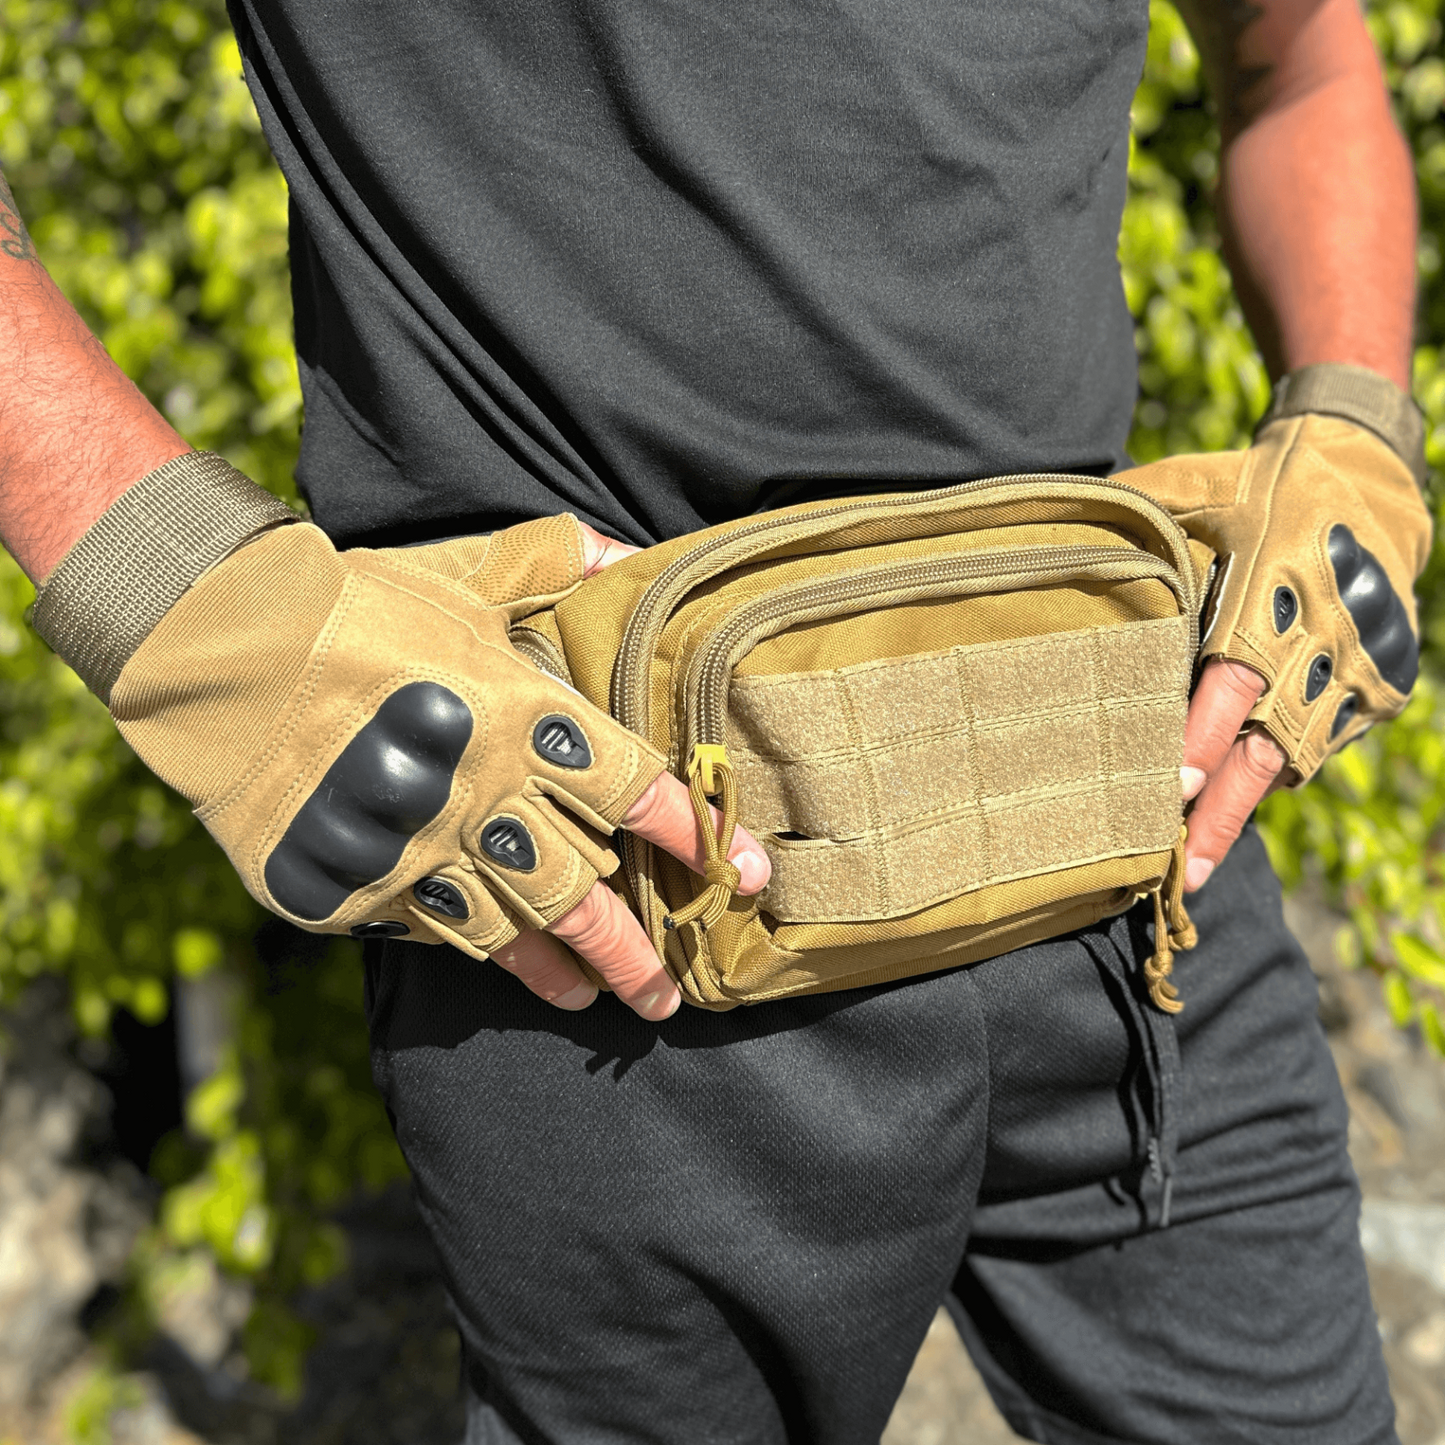 Tactical Fingerless Airsoft Gloves for Outdoor Sports, Paintball, and Motorcycling, Goodies N Stuff